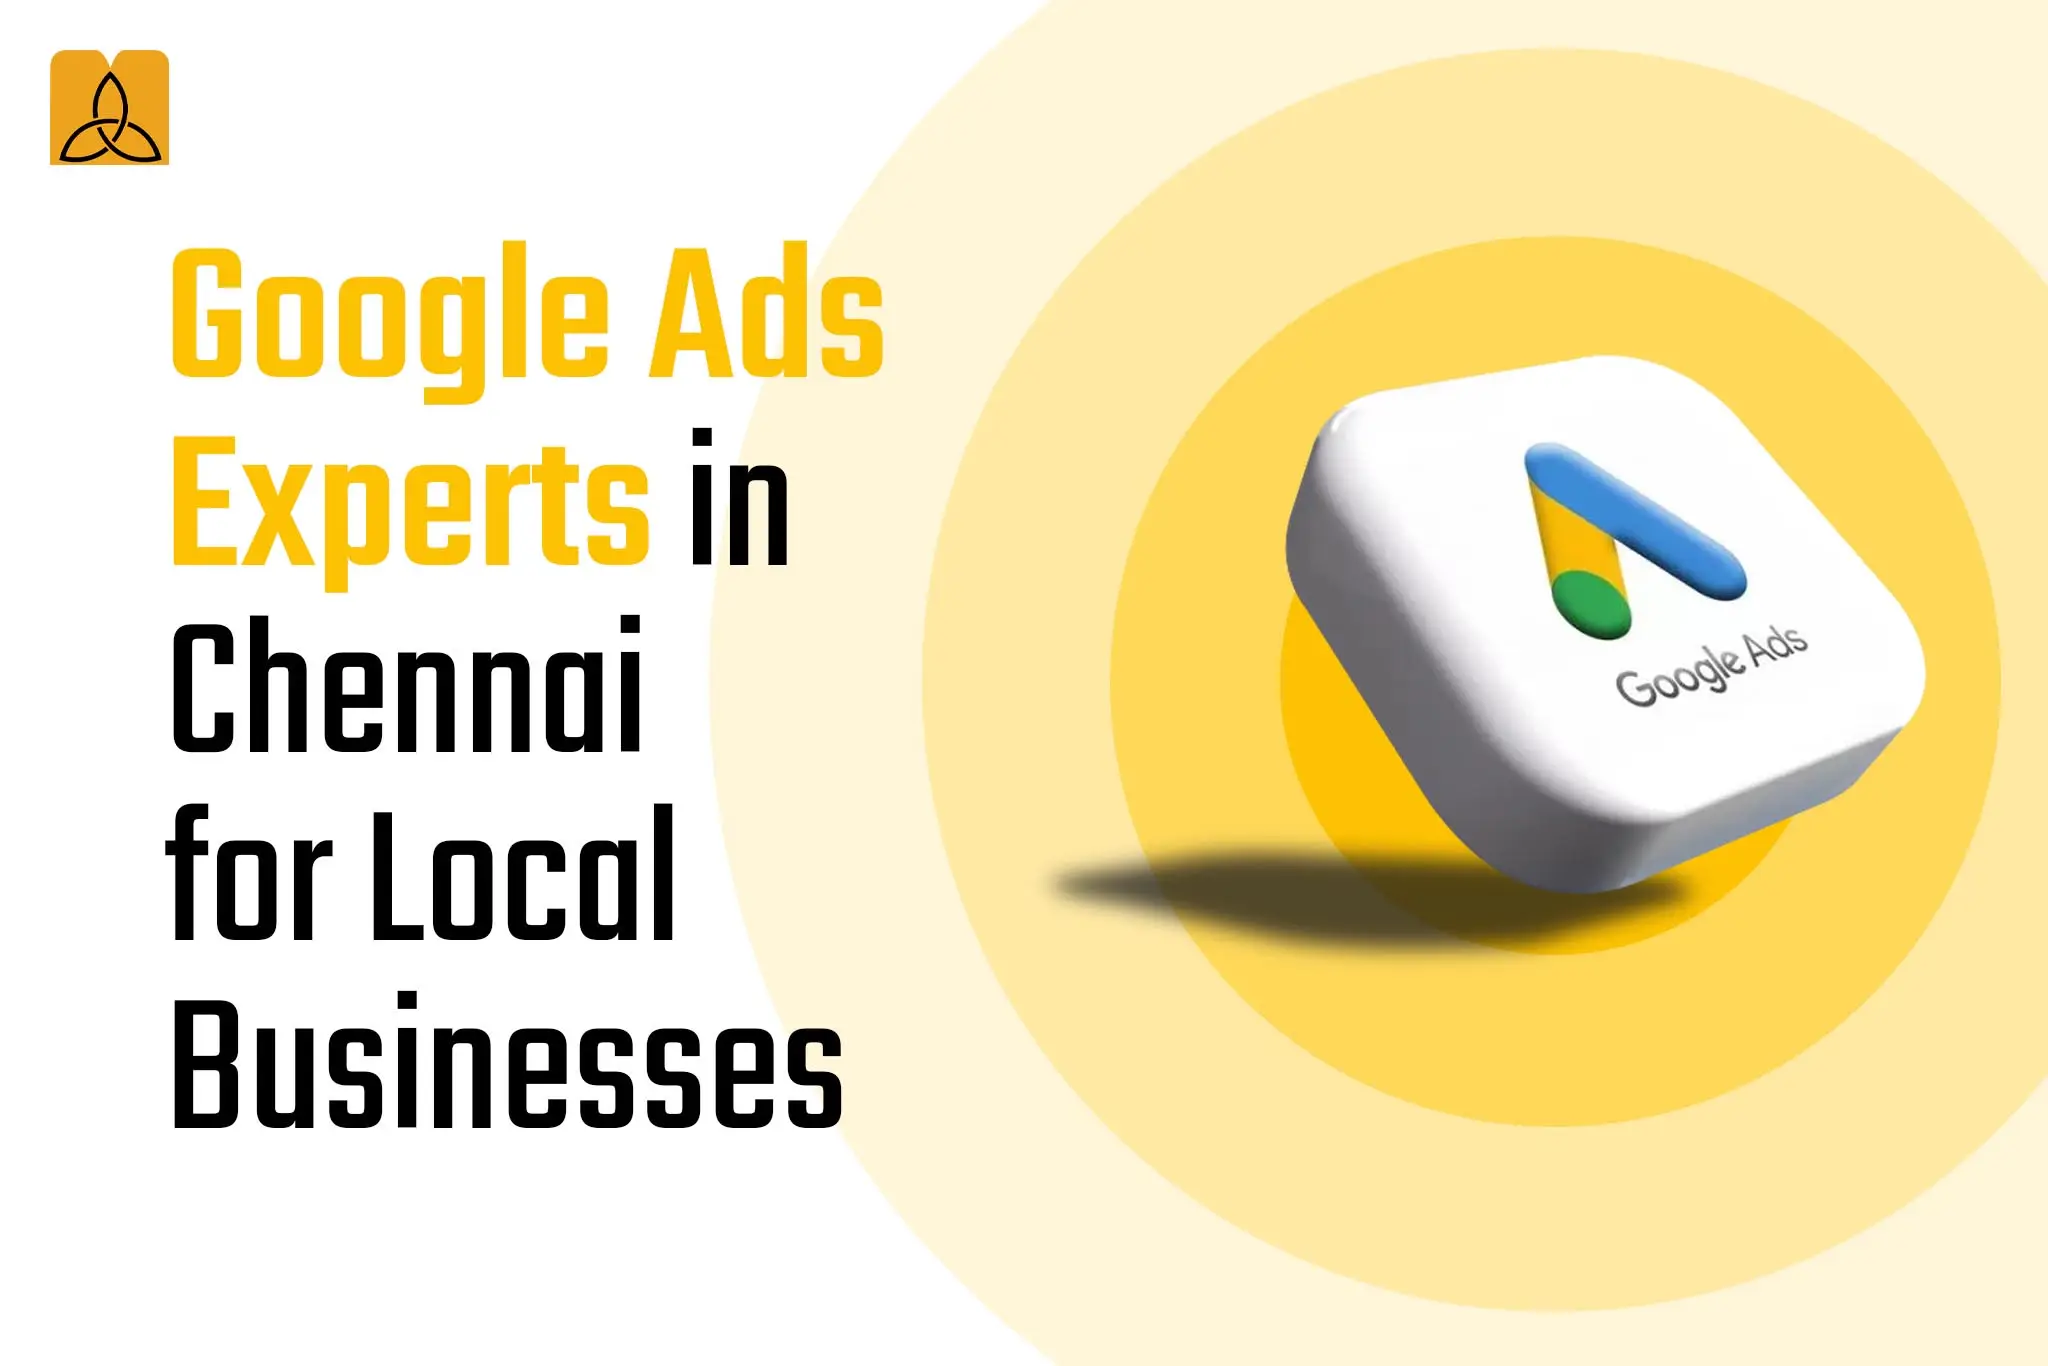 Google Ads Experts in Chennai for Local Businesses